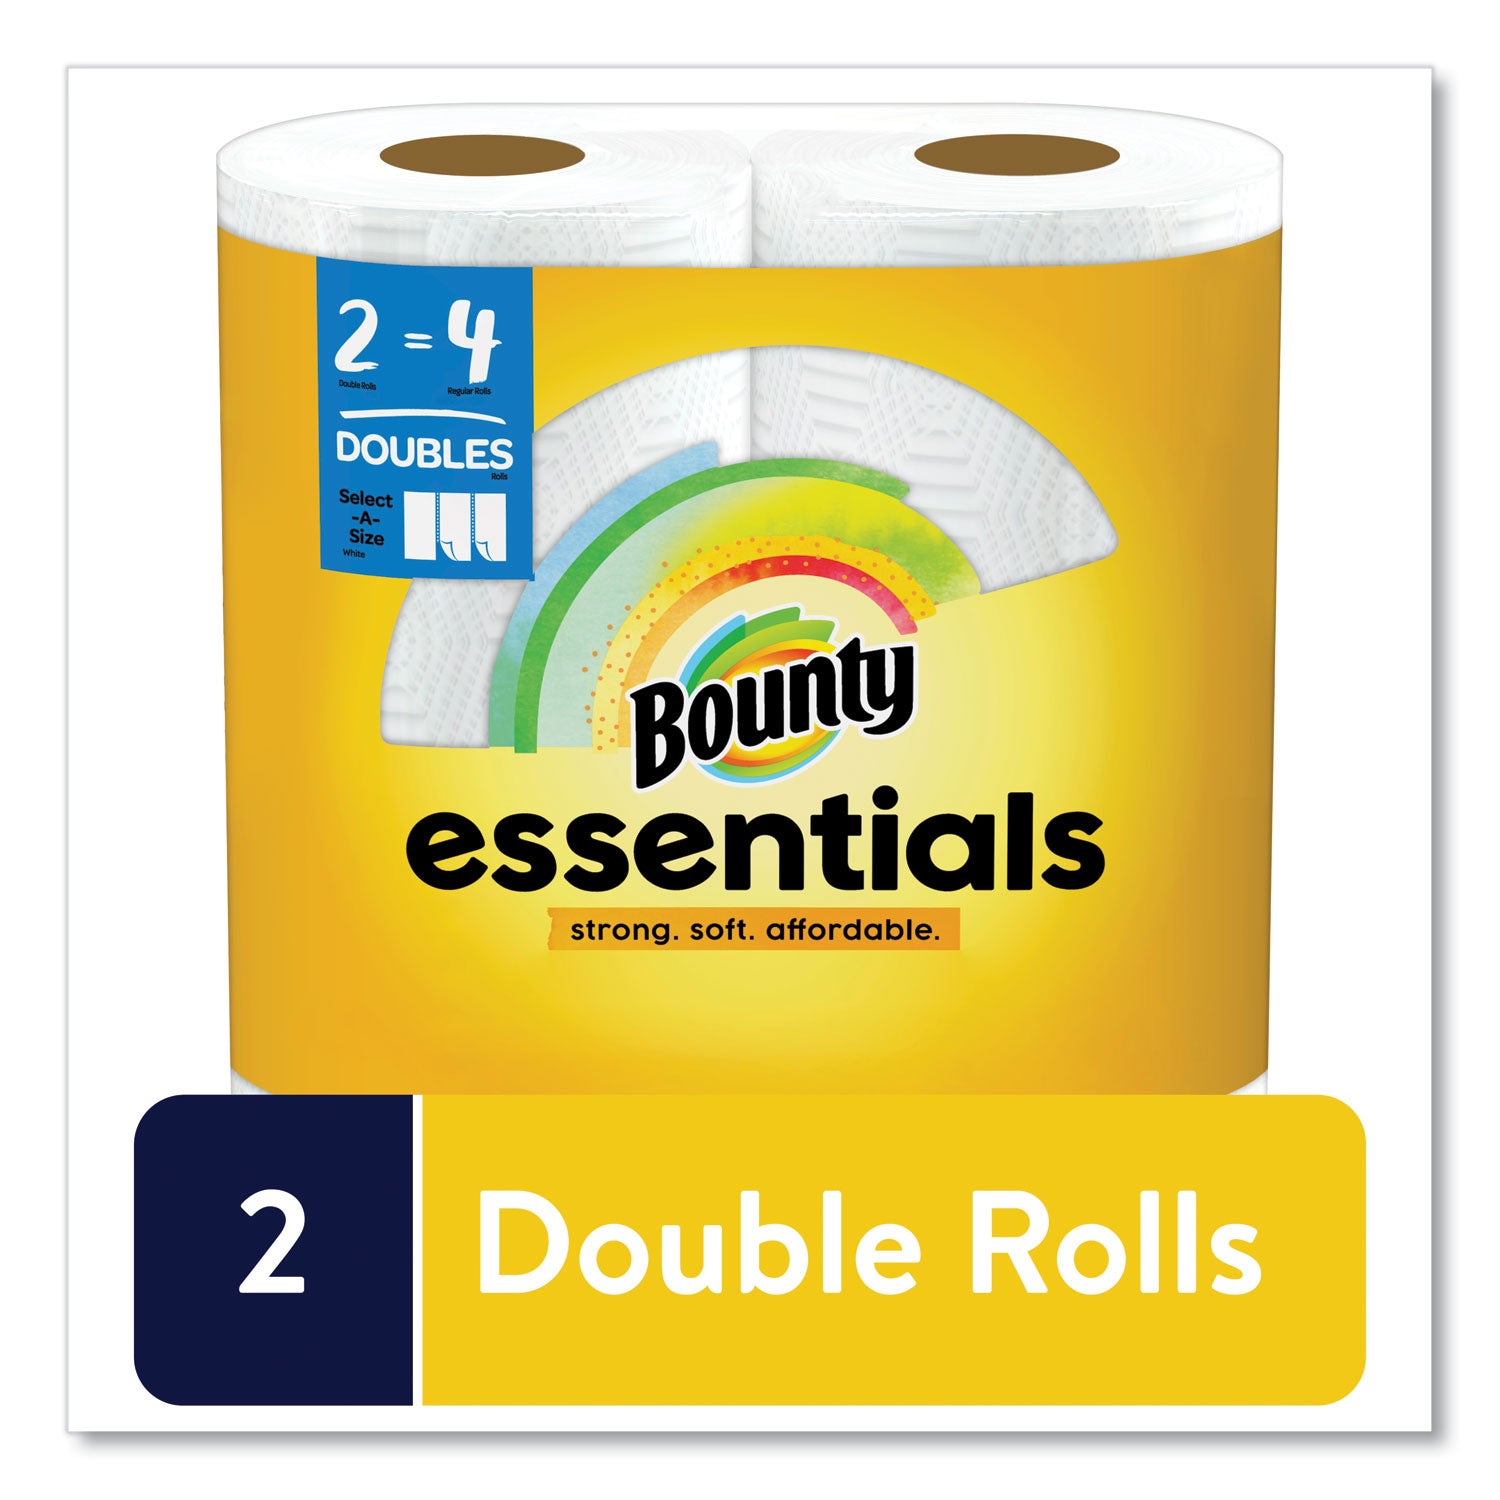 essentials-select-a-size-kitchen-roll-paper-towels-2-ply-124-sheets-roll-6-rolls-carton_pgc56210 - 2